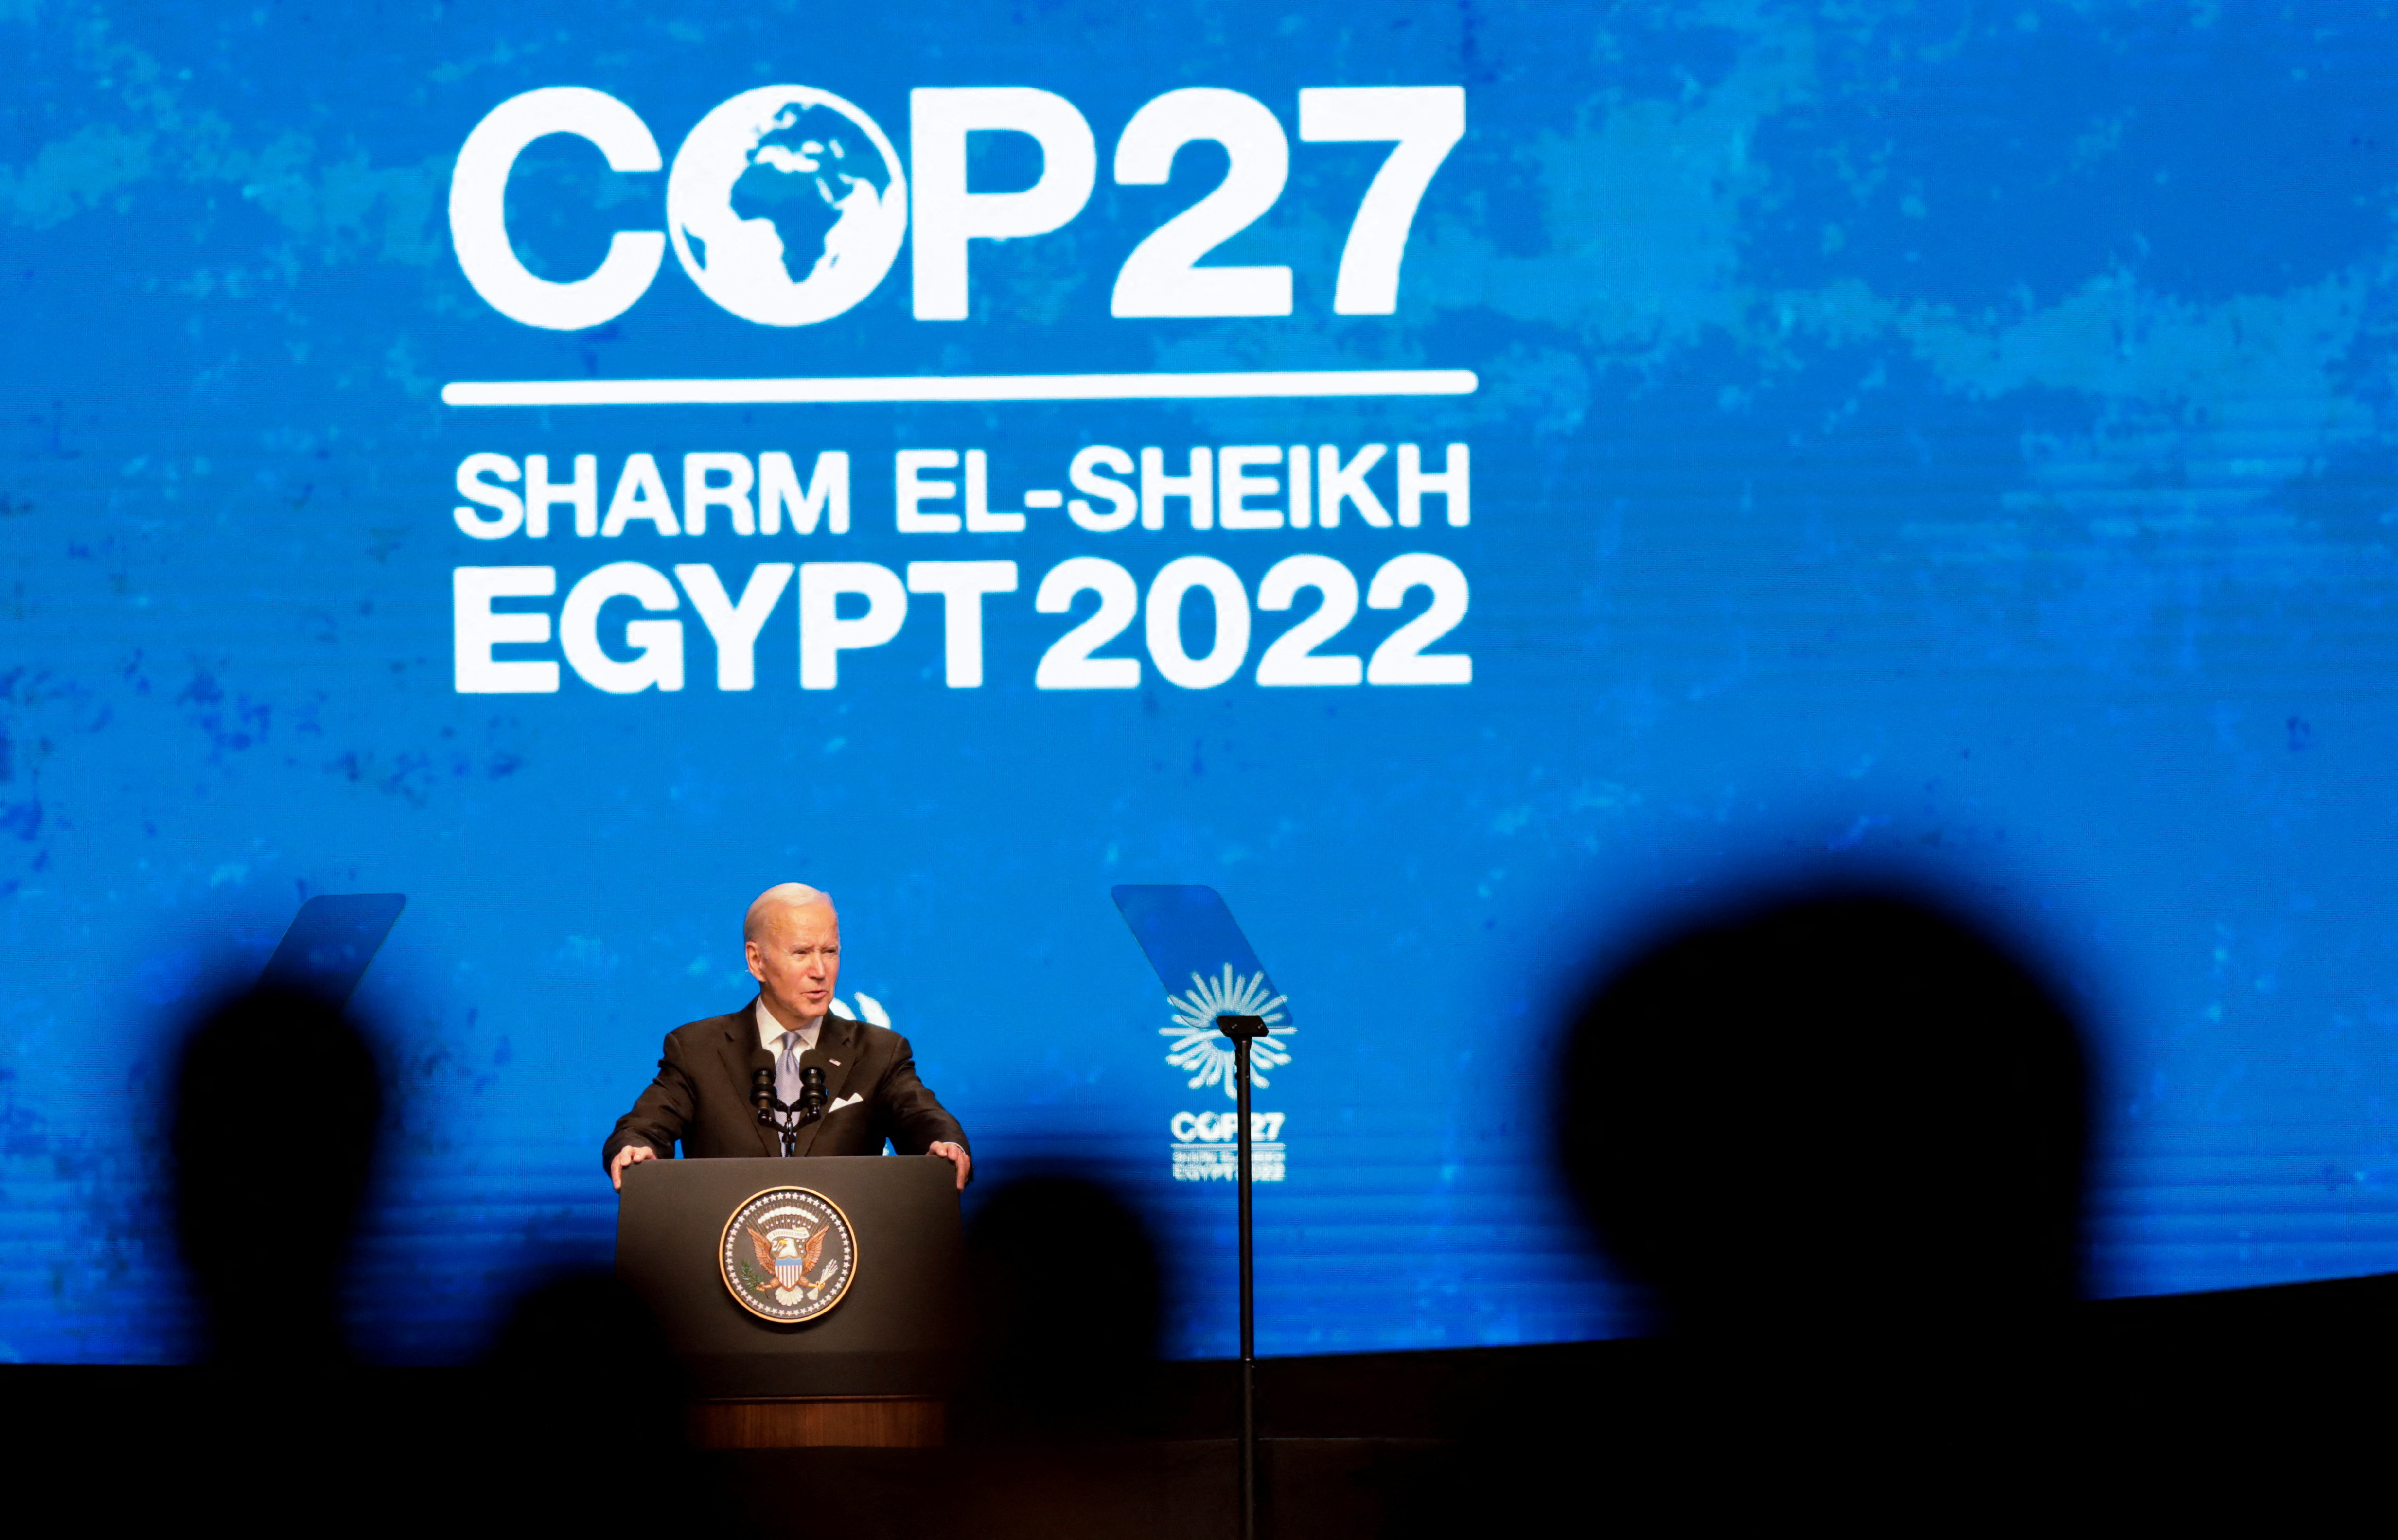 COP27 climate summit in Egypt